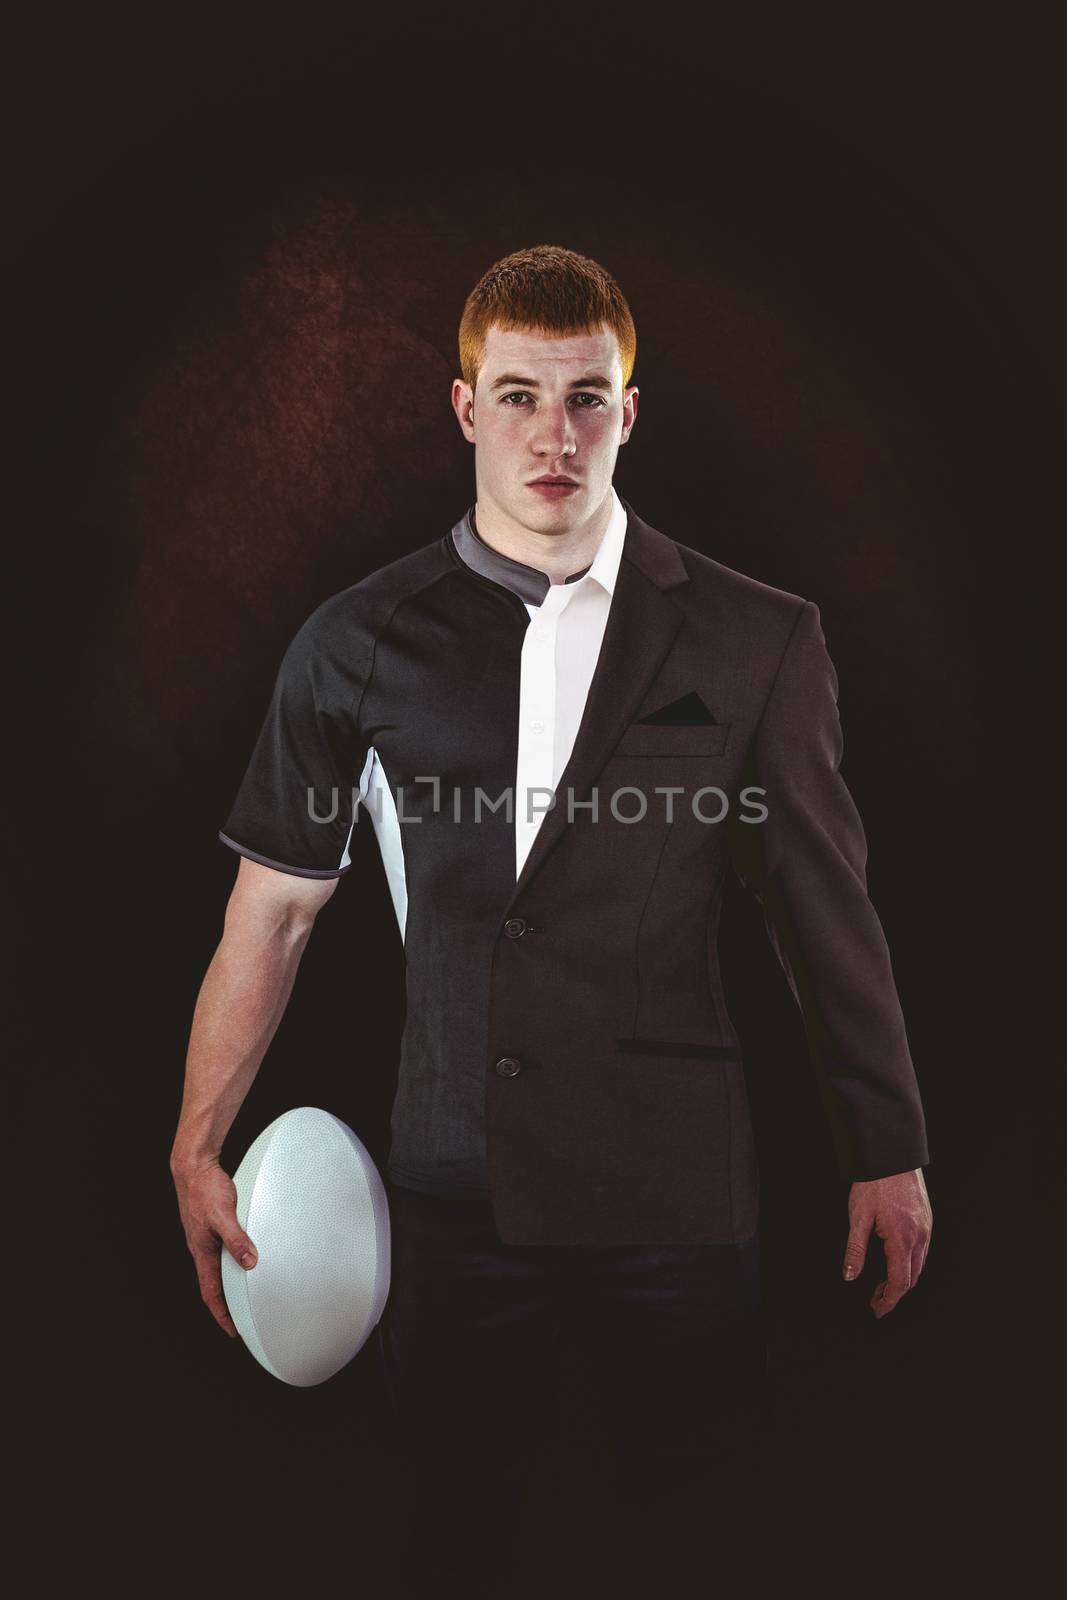 Composite image of rugby player holding a rugby ball by Wavebreakmedia